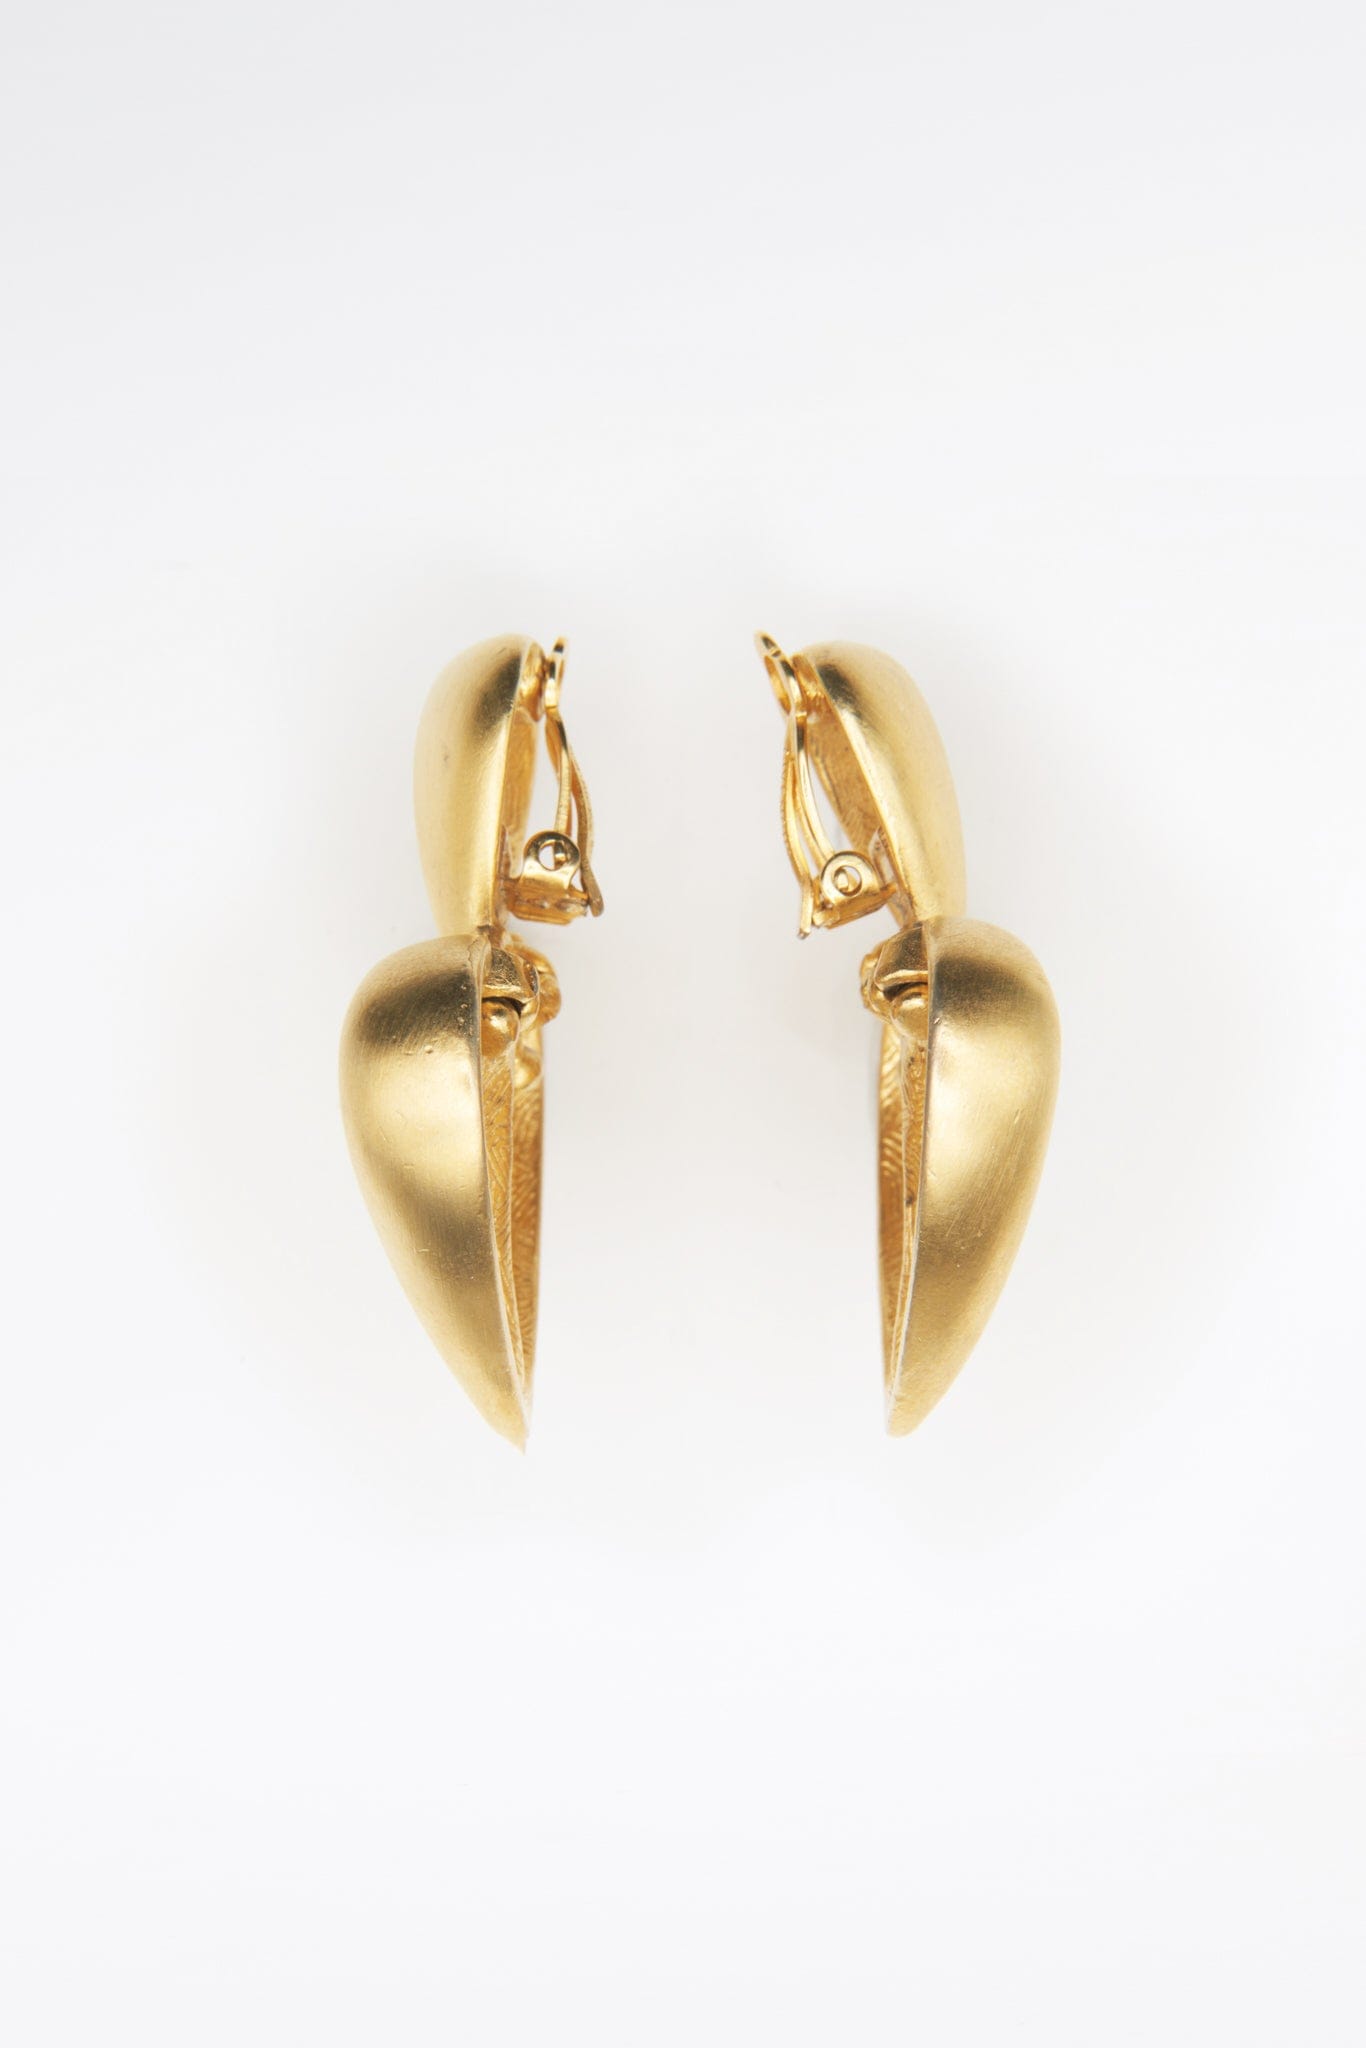 Vintage Gold Givenchy Heart Earrings